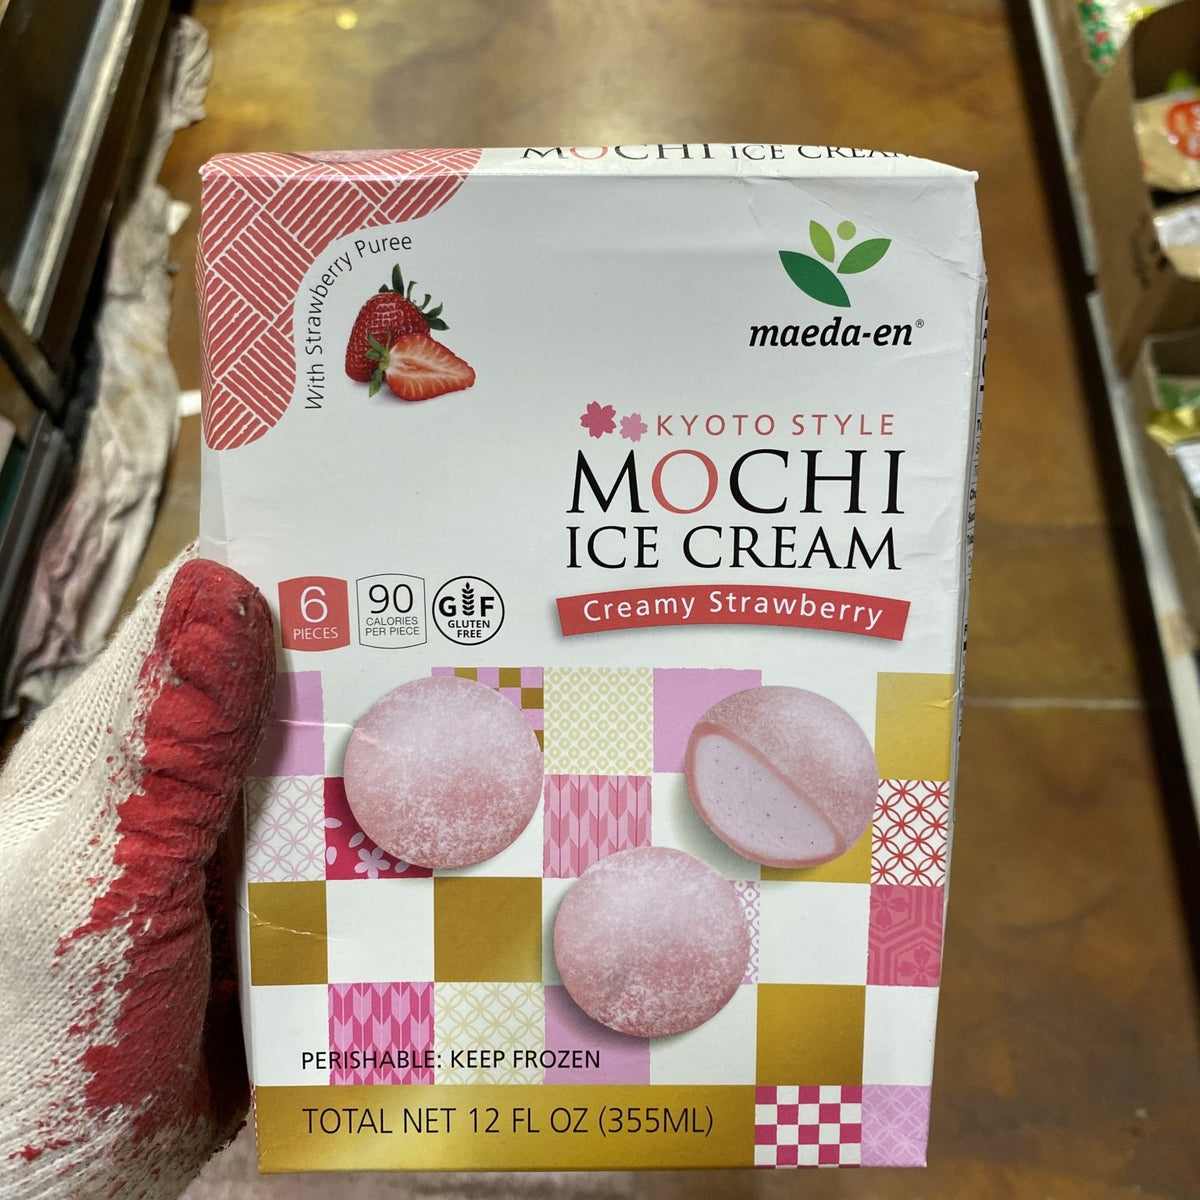 Strawberry Mochi – The Works Seattle